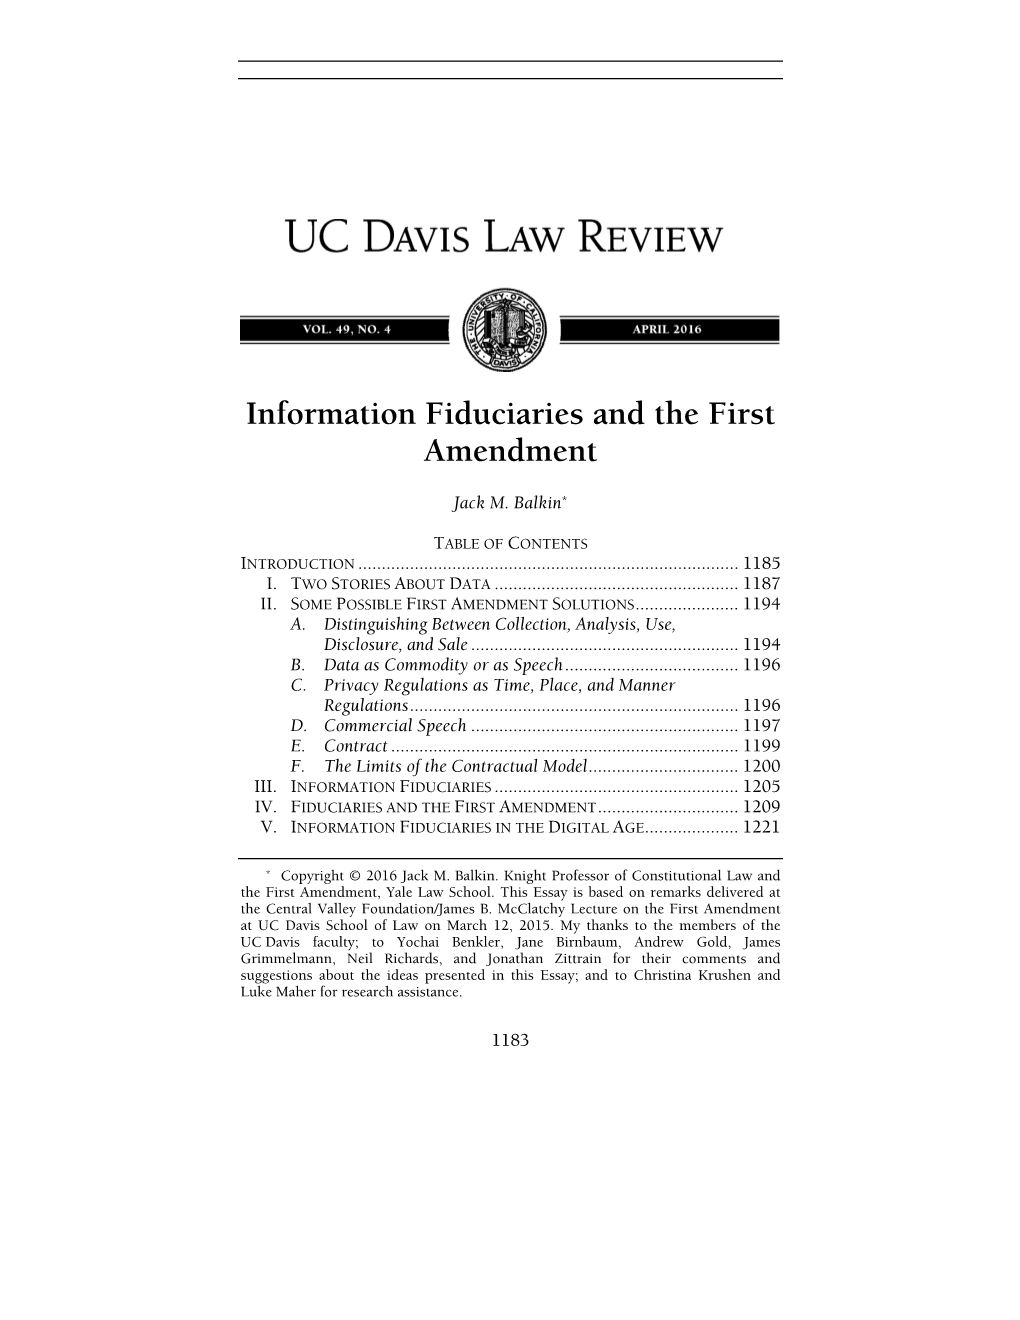 Information Fiduciaries and the First Amendment